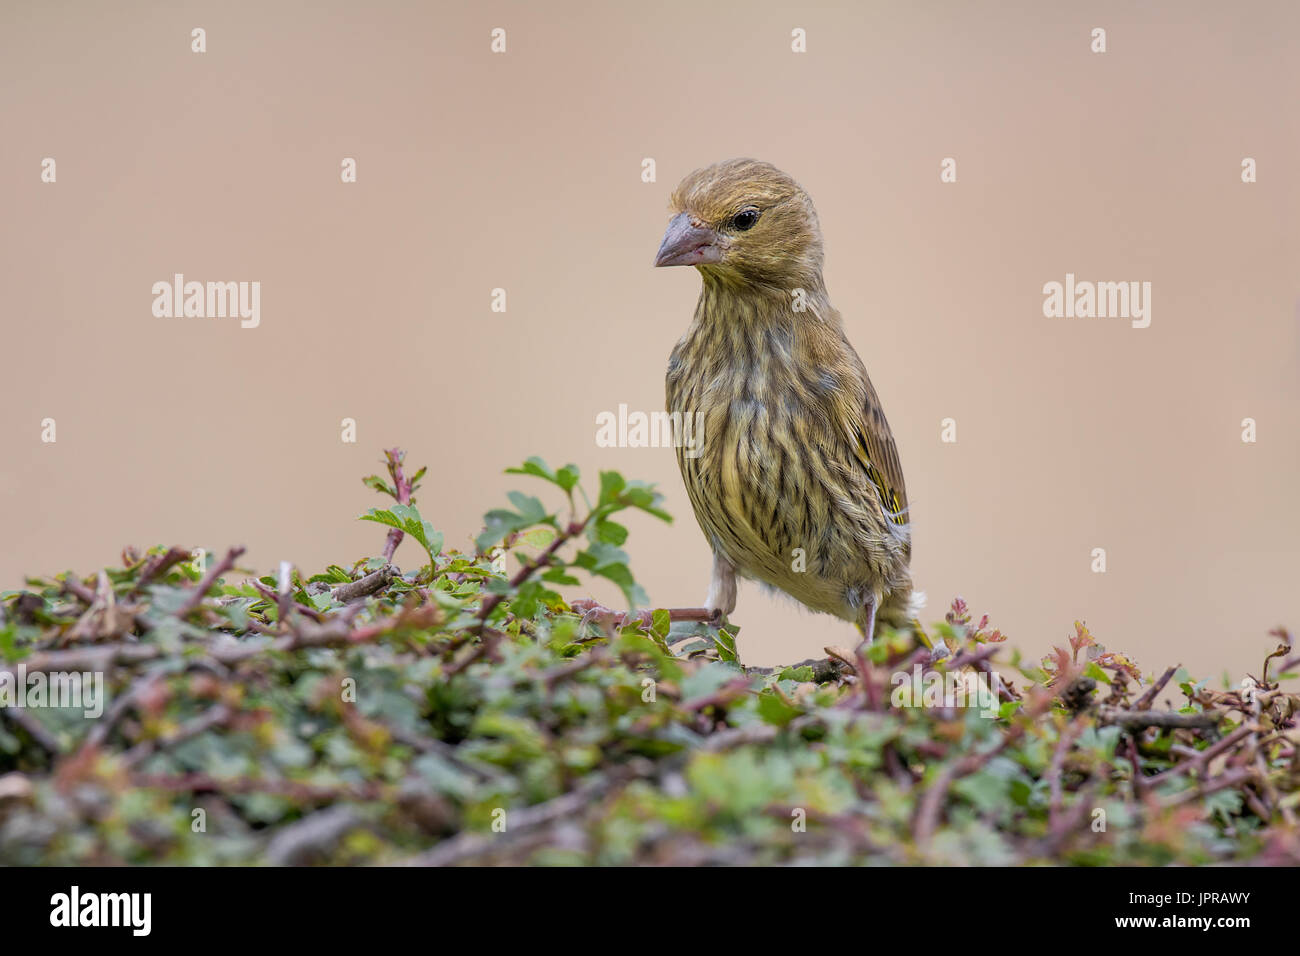 Juvenile greenfinch standing on a hedge stretched upwards looking down inquisitive Stock Photo